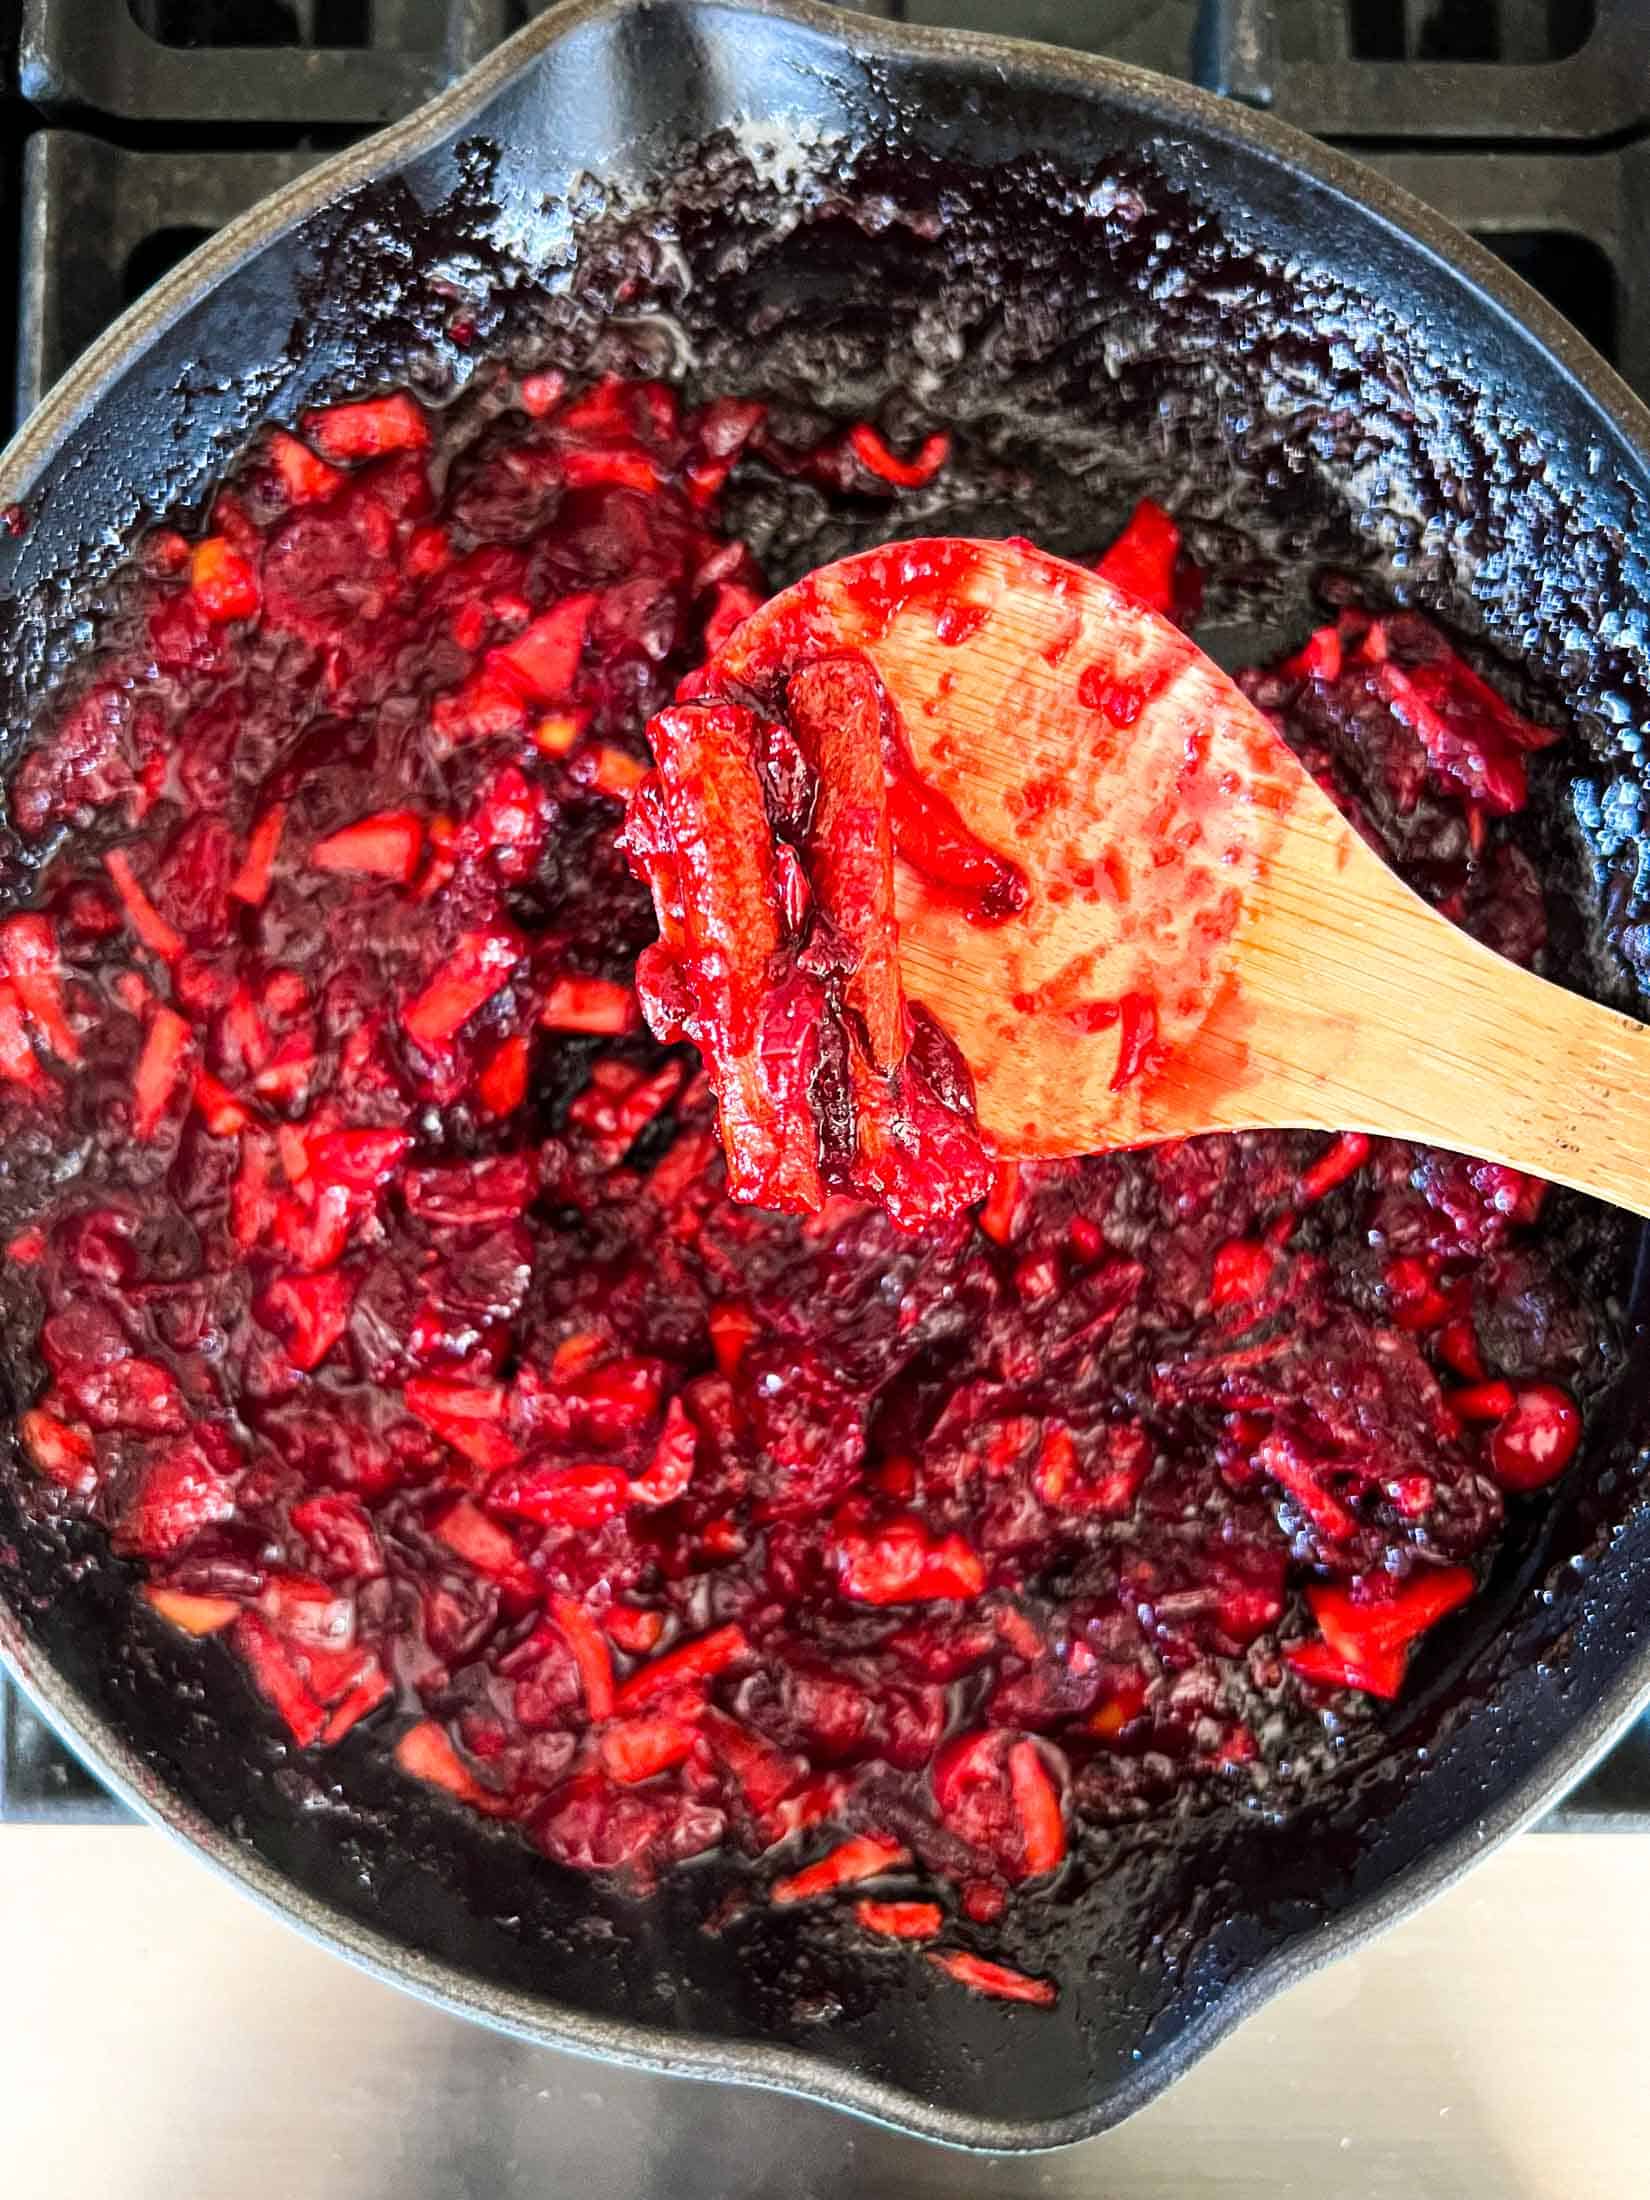 Smoked cranberry sauce after being cooked down, closeup on a wooden spoon.